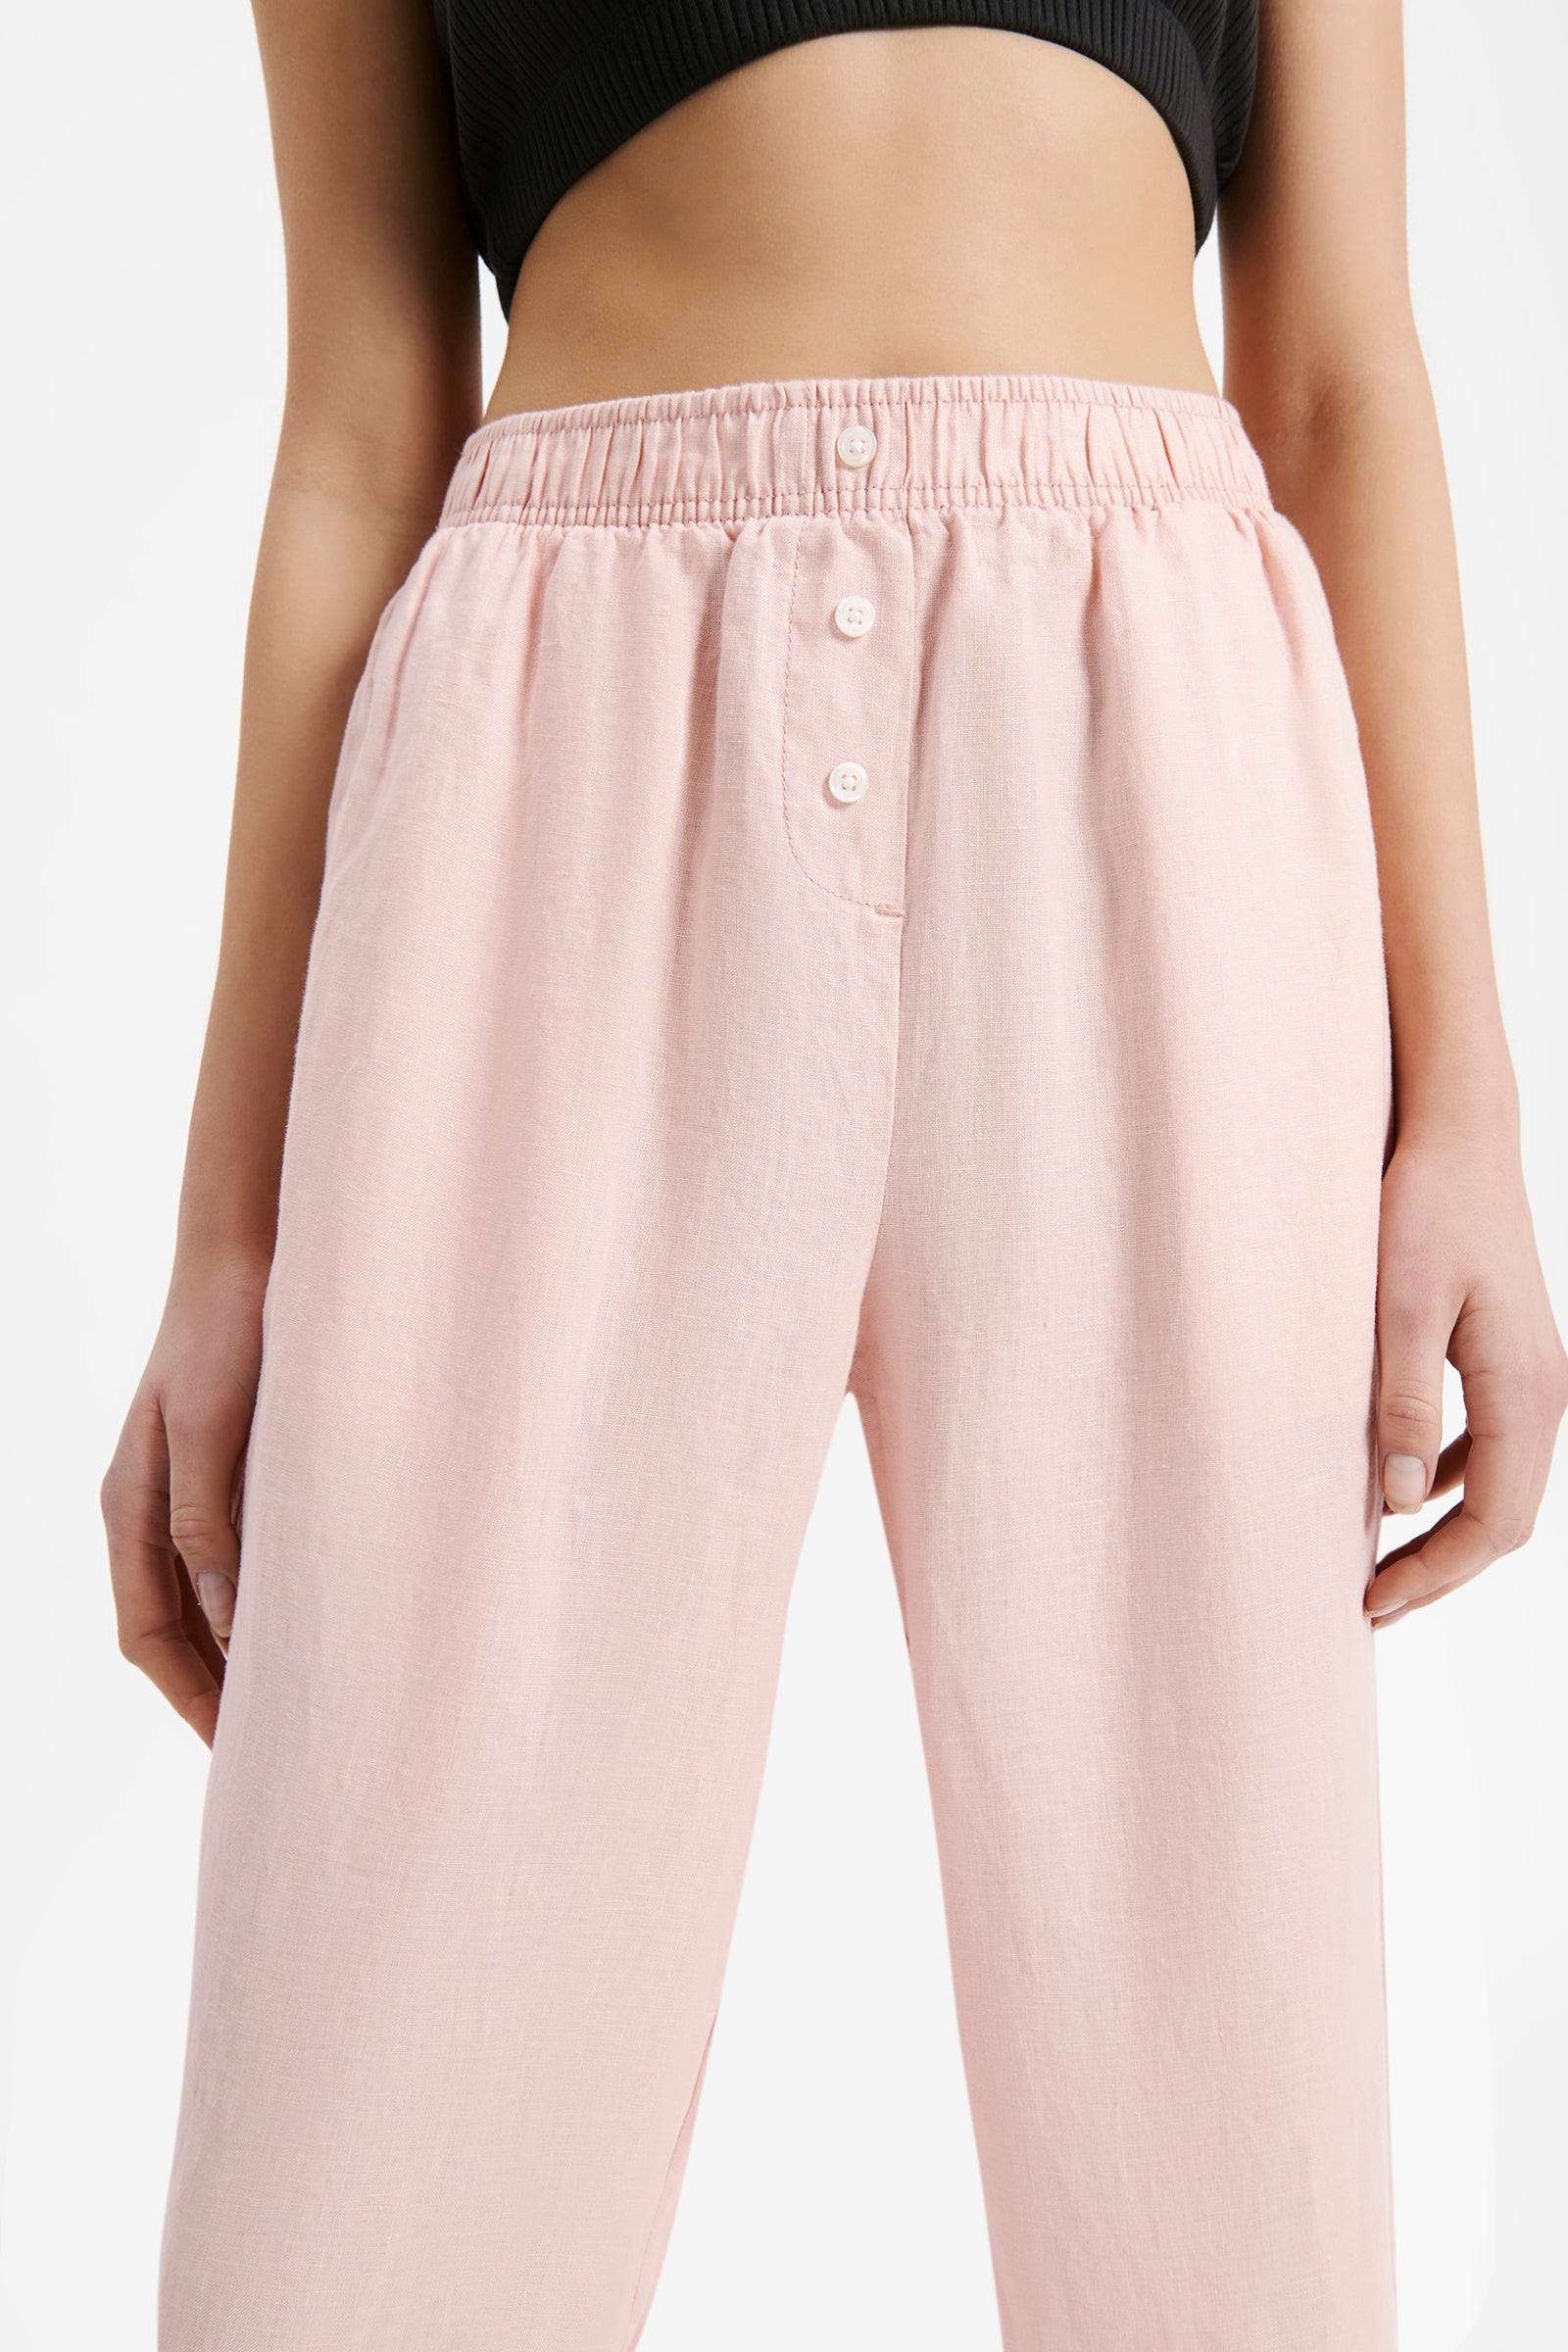 Nude Lucy Lounge Linen Pant in a Light Pink Guava Colour